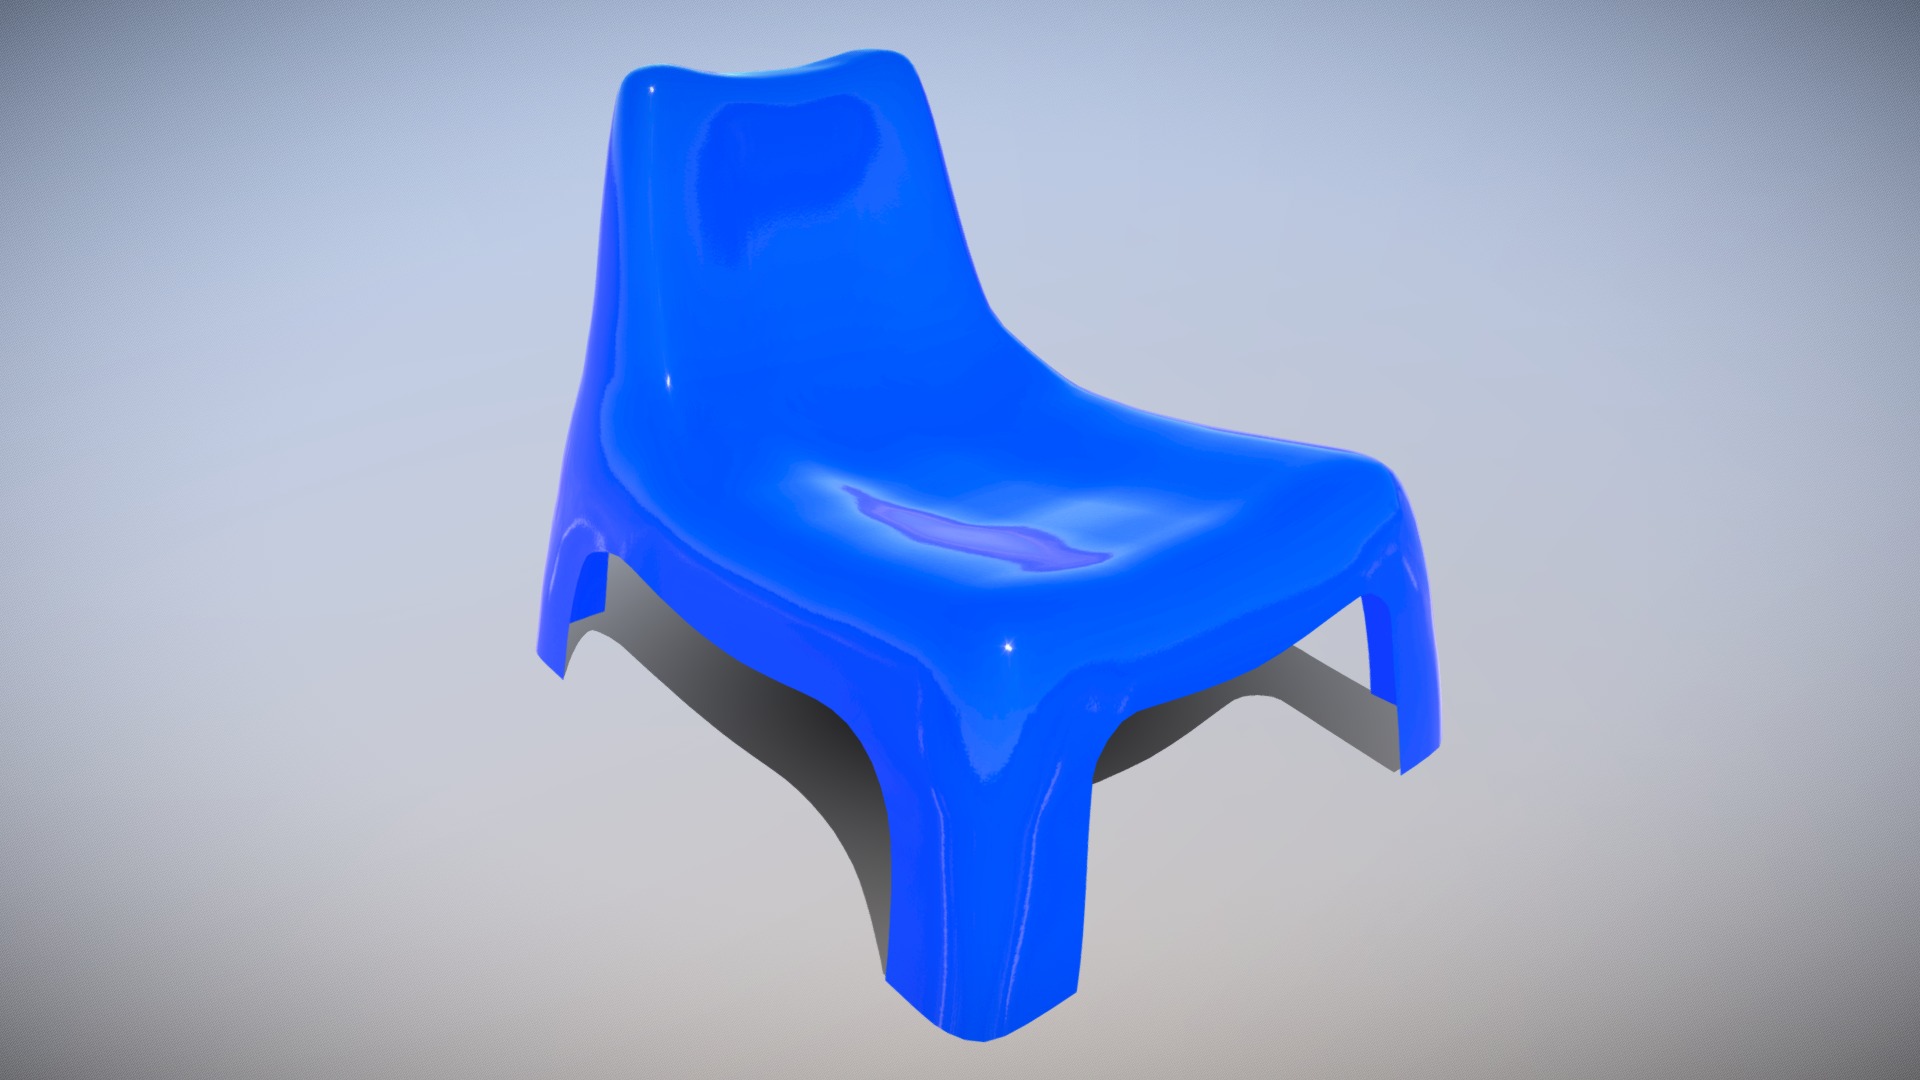 3D model Vago Chair IKEA Plastic material Colors Low Poly - This is a 3D model of the Vago Chair IKEA Plastic material Colors Low Poly. The 3D model is about a blue plastic model of a blue horse.